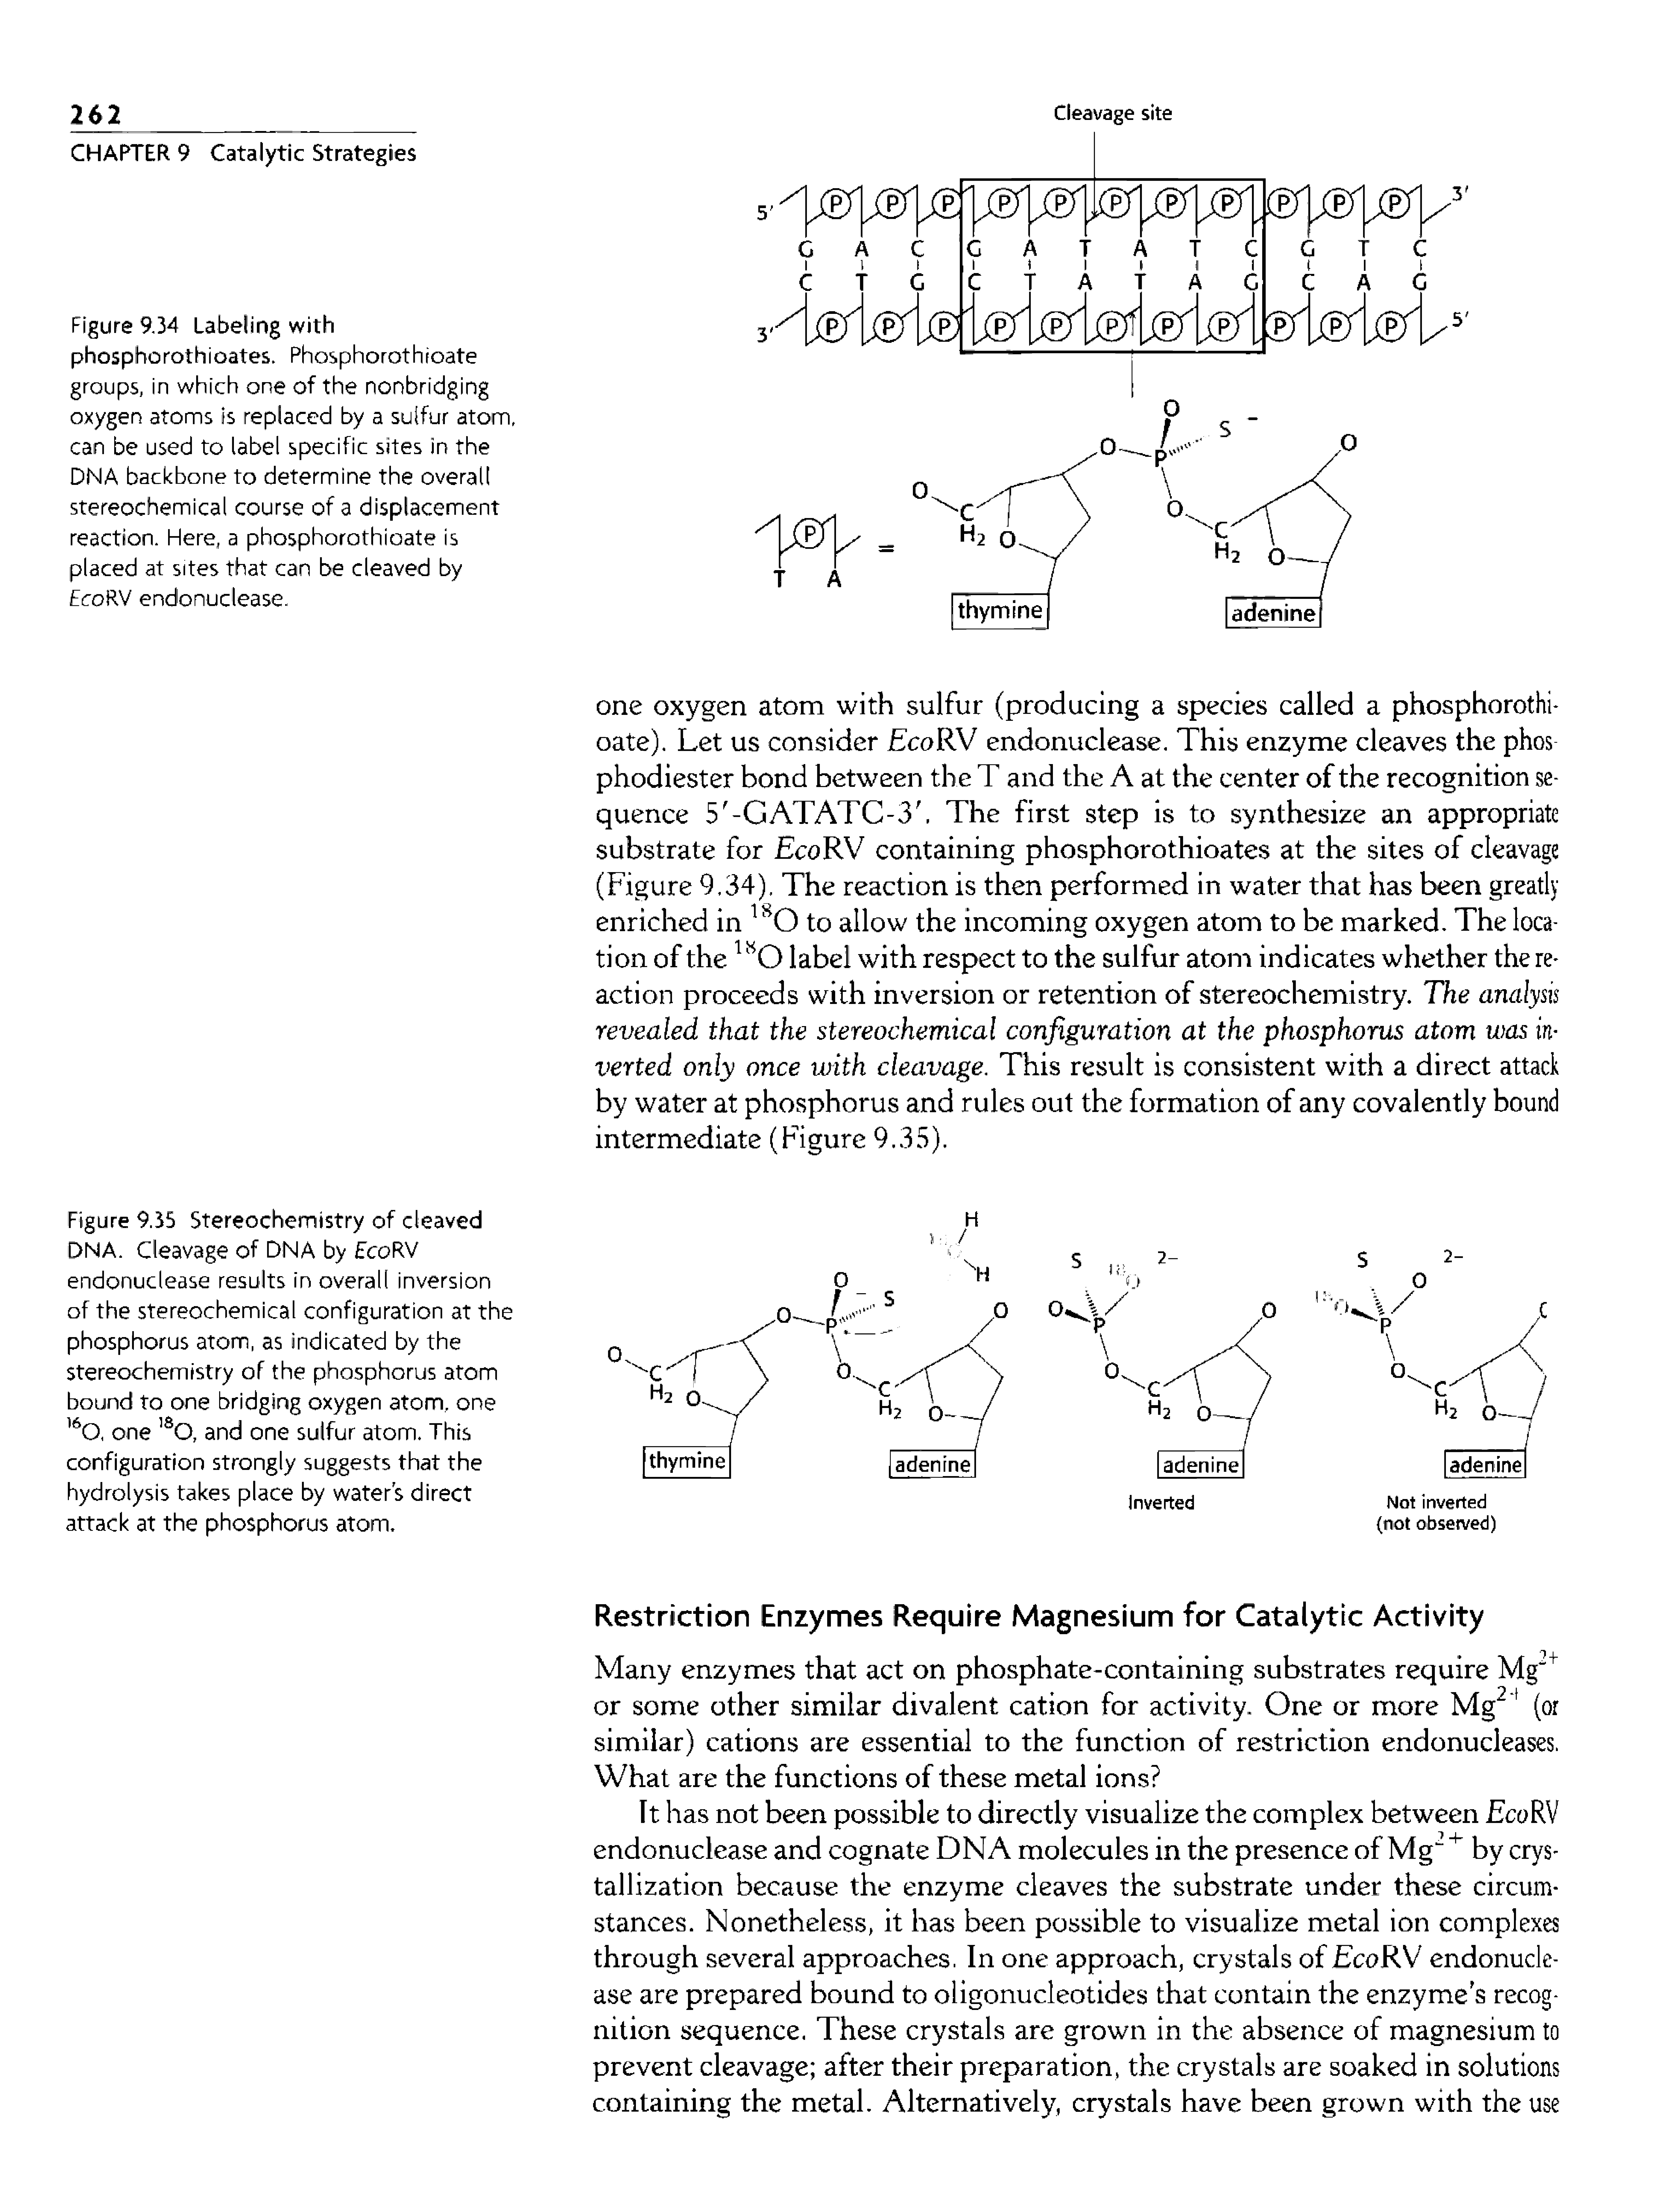 Figure 9.35 Stereochemistry of cleaved DNA. Cleavage of DNA by EcoRV endonuclease results in overall inversion of the stereochemical configuration at the phosphorus atom, as indicated by the stereochemistry of the phosphorus atom bound to one bridging oxygen atom, one 0. one and one sulfur atom. This configuration strongly suggests that the hydrolysis takes place by waters direct attack at the phosphorus atom.